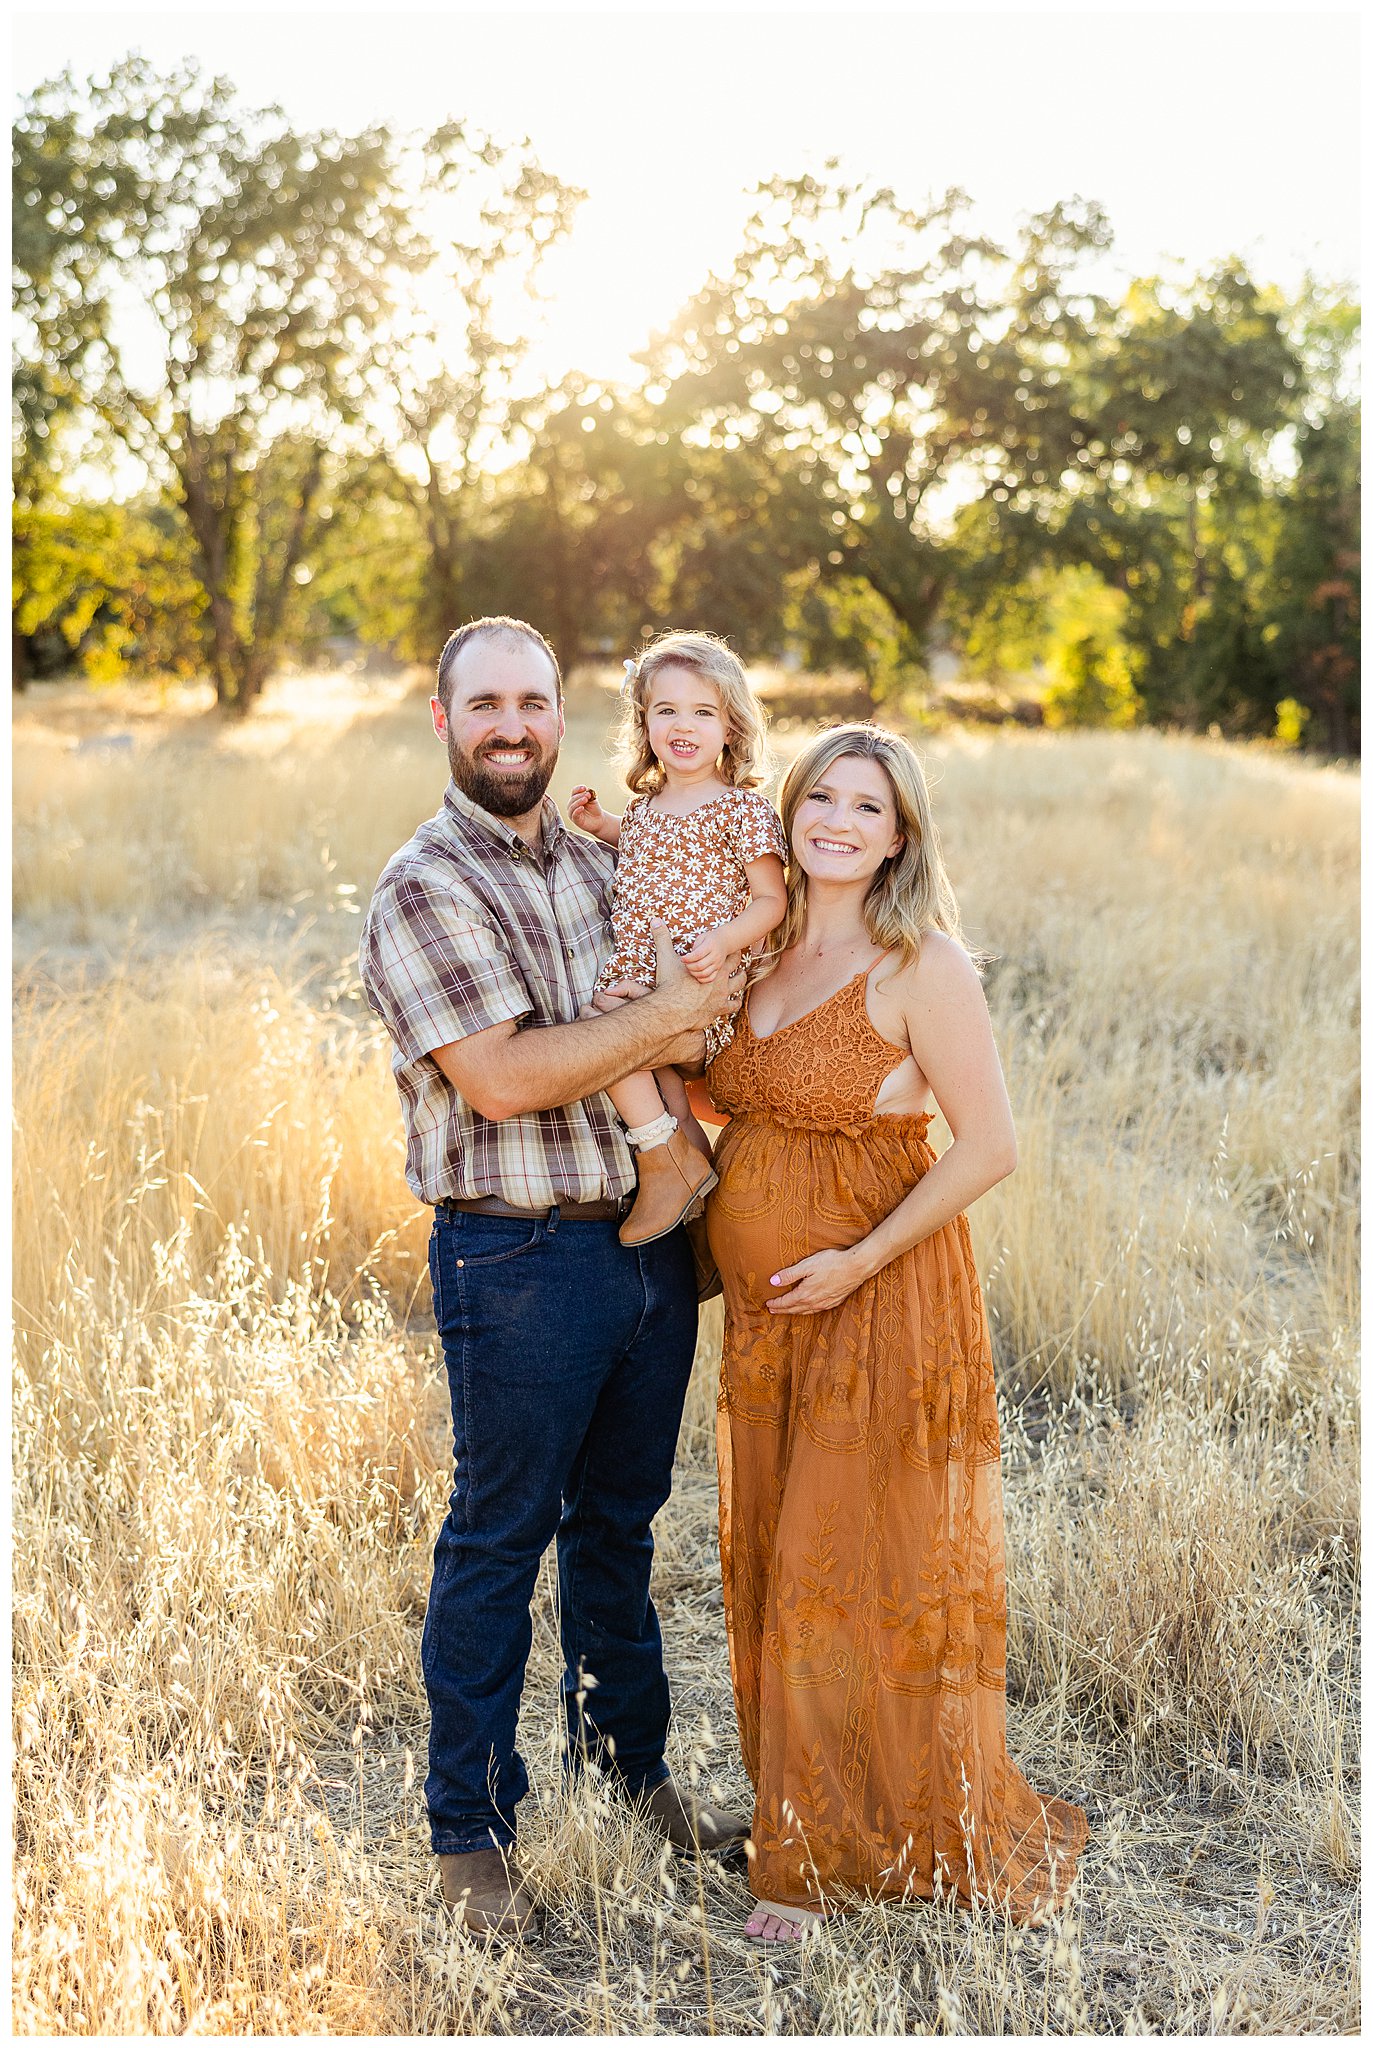 Late Summer Family Maternity Session with Burnt Orange Dress | Andie + Steven